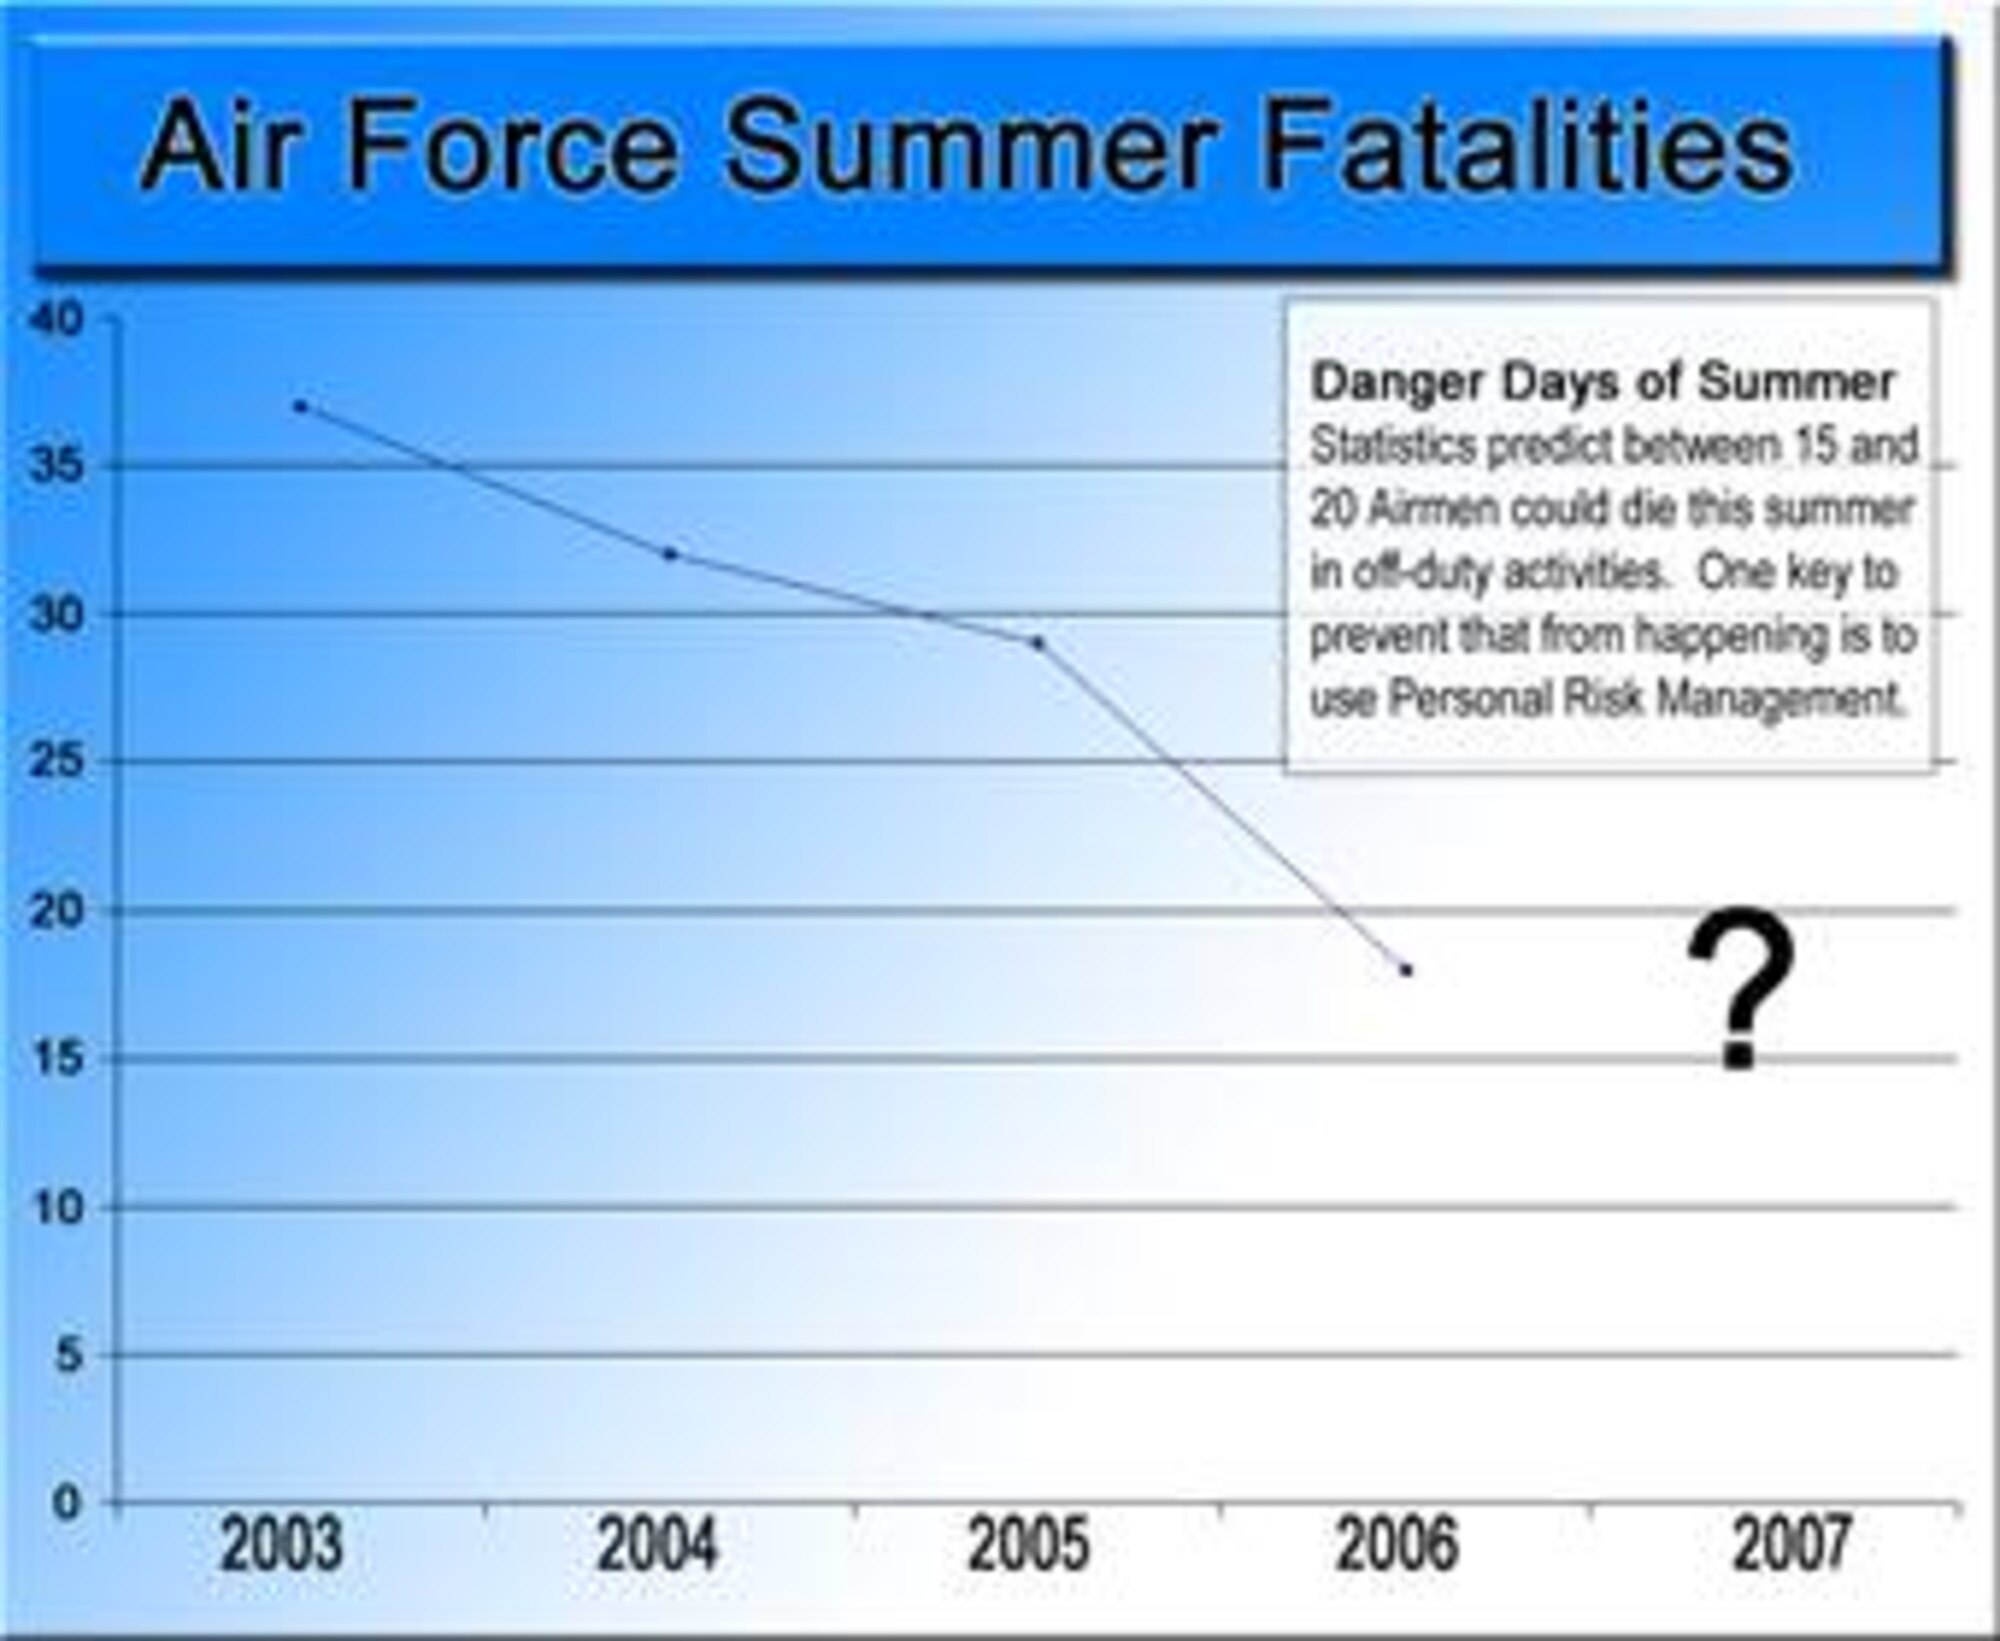 Statistics predict between 15 and 20 Airmen could die this summer while participating in off-duty activities.  One key to prevent that from happening is to use Personal Risk Management, a concept that makes you stop before you do something and think about what you're going to do before you do it.  (Graphic Illustration by Senior Airman Stephen Cadette; information provided by Air Force Safety Center)